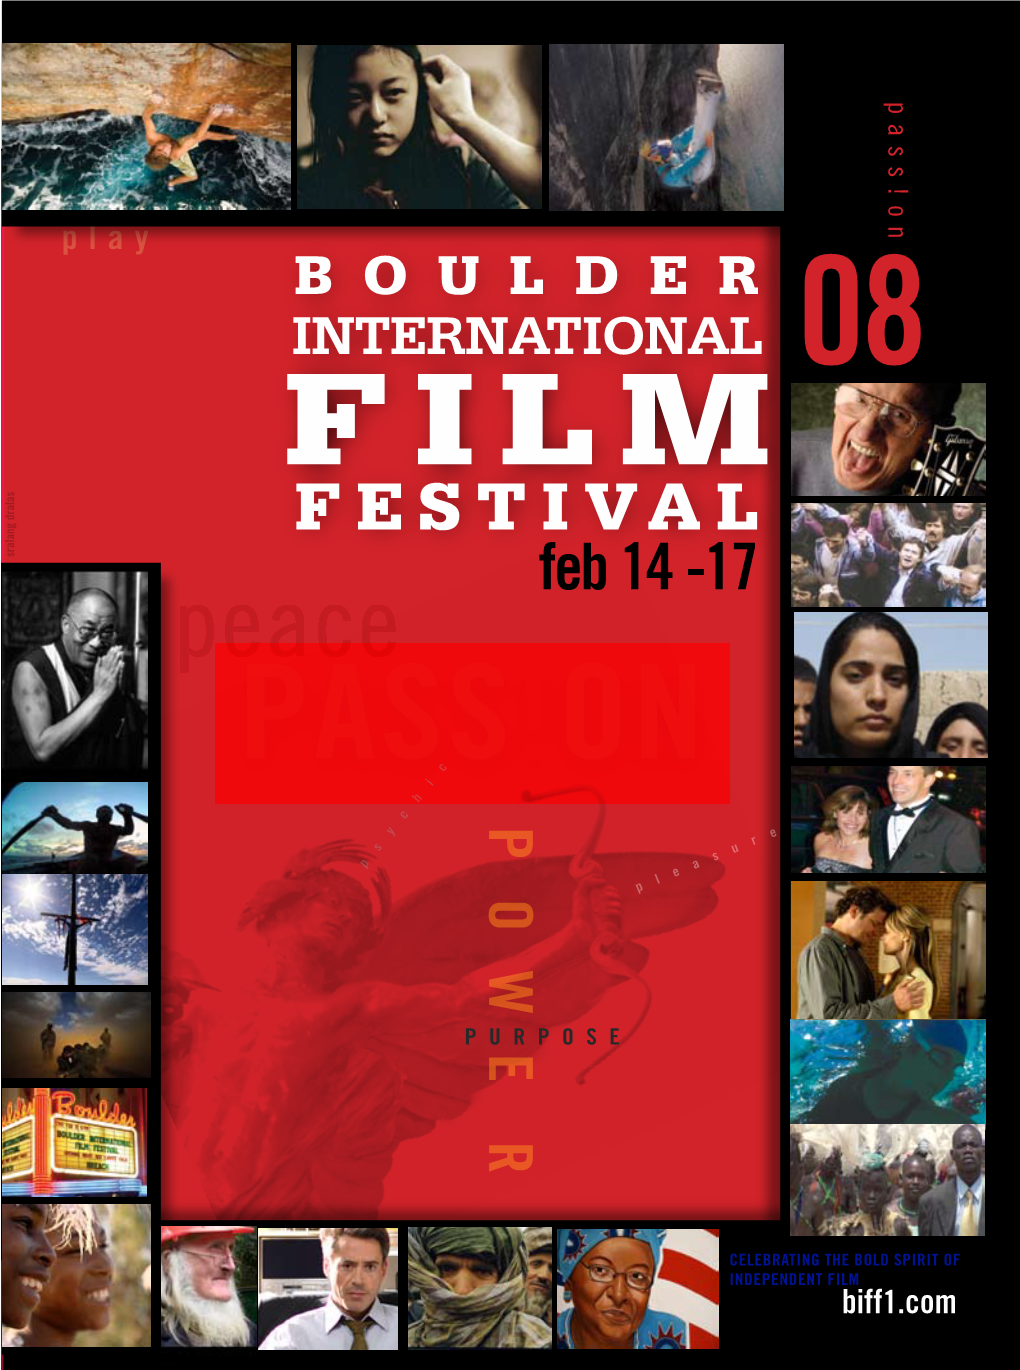 Boulder International Film Festival Welcome to an Exhibition of the Best Works of the Greatest Film Artists of Their Genres